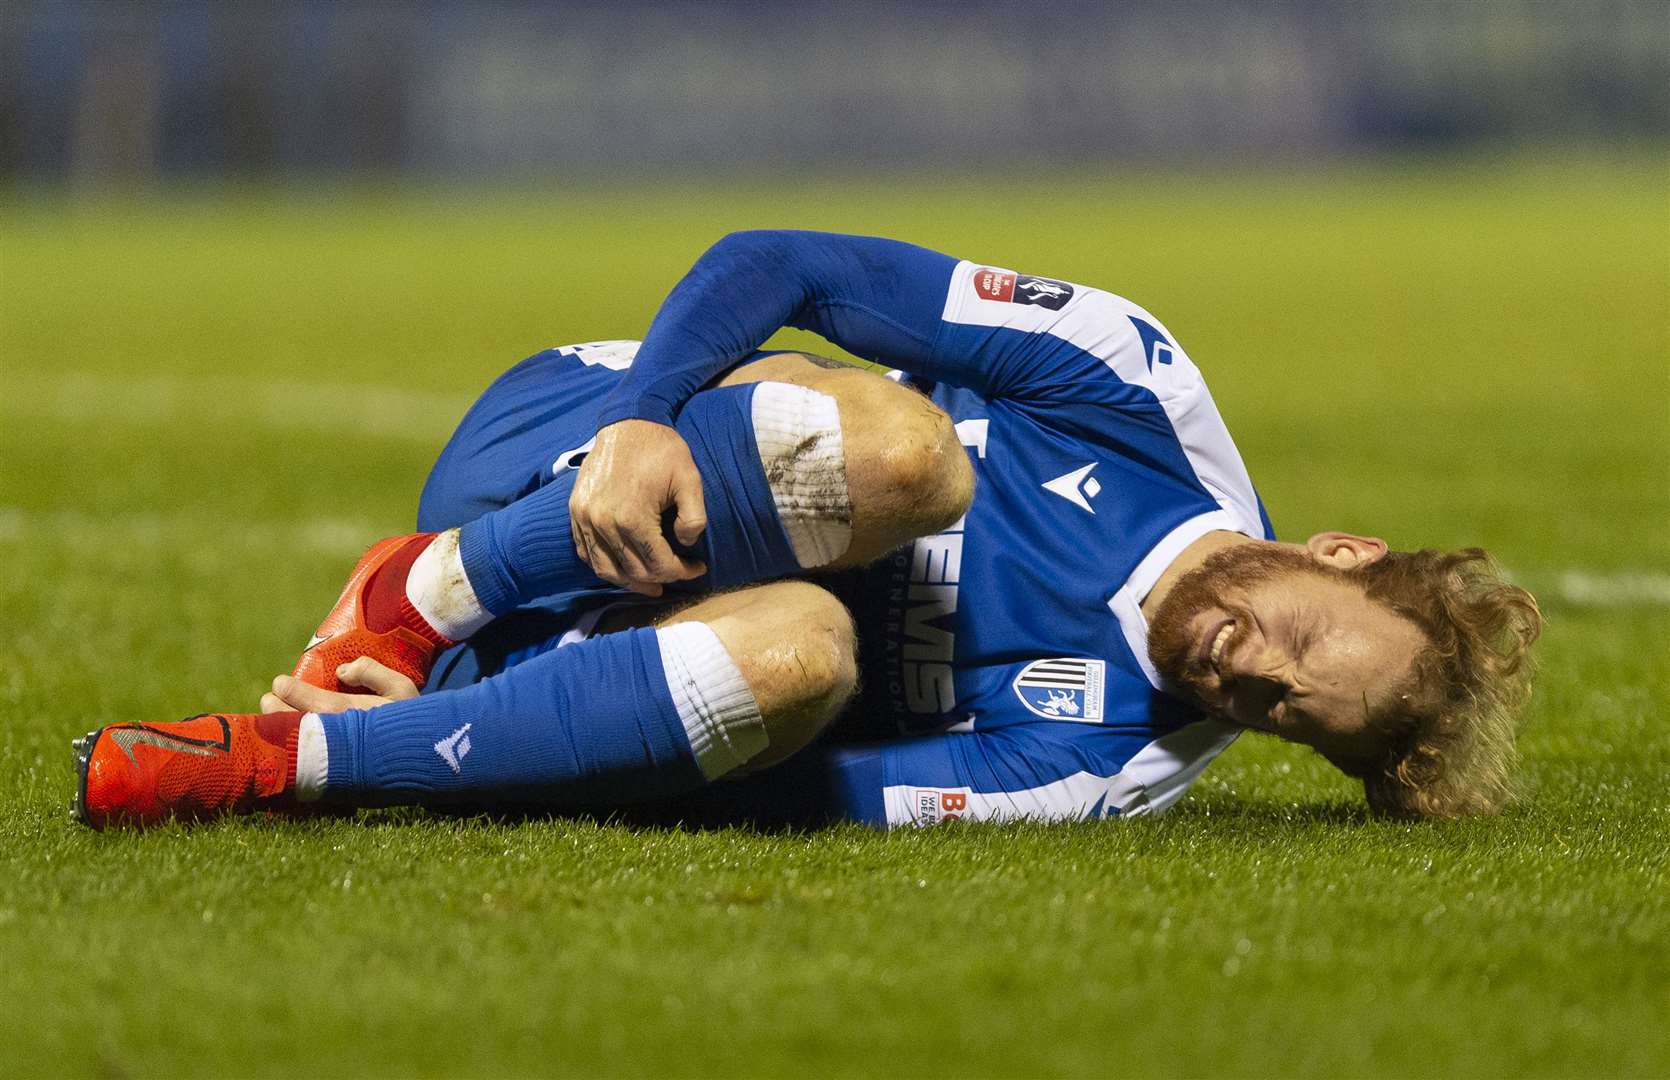 It was a physical battle against Sunderland on Tuesday night. Connor Ogilvie feels the pain Picture: Ady Kerry